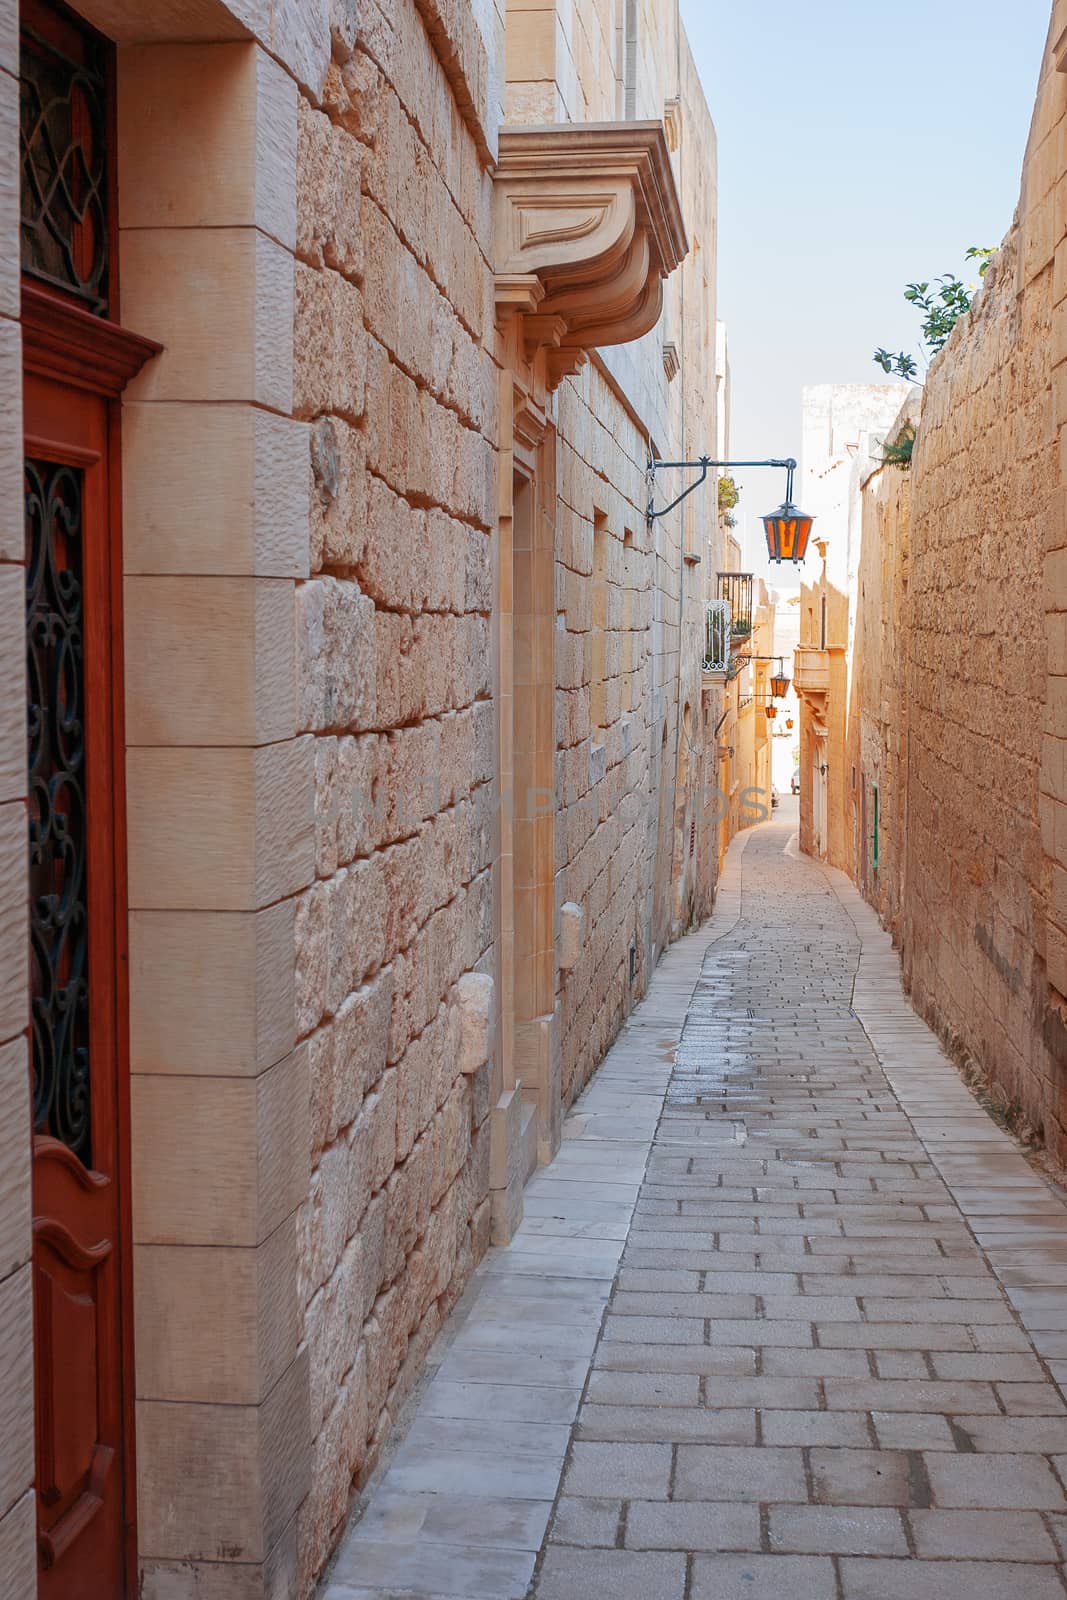 Narrow streets of Mdina, old capital of Malta. Stone buildings with old fashioned doors and balconies. by aksenovko